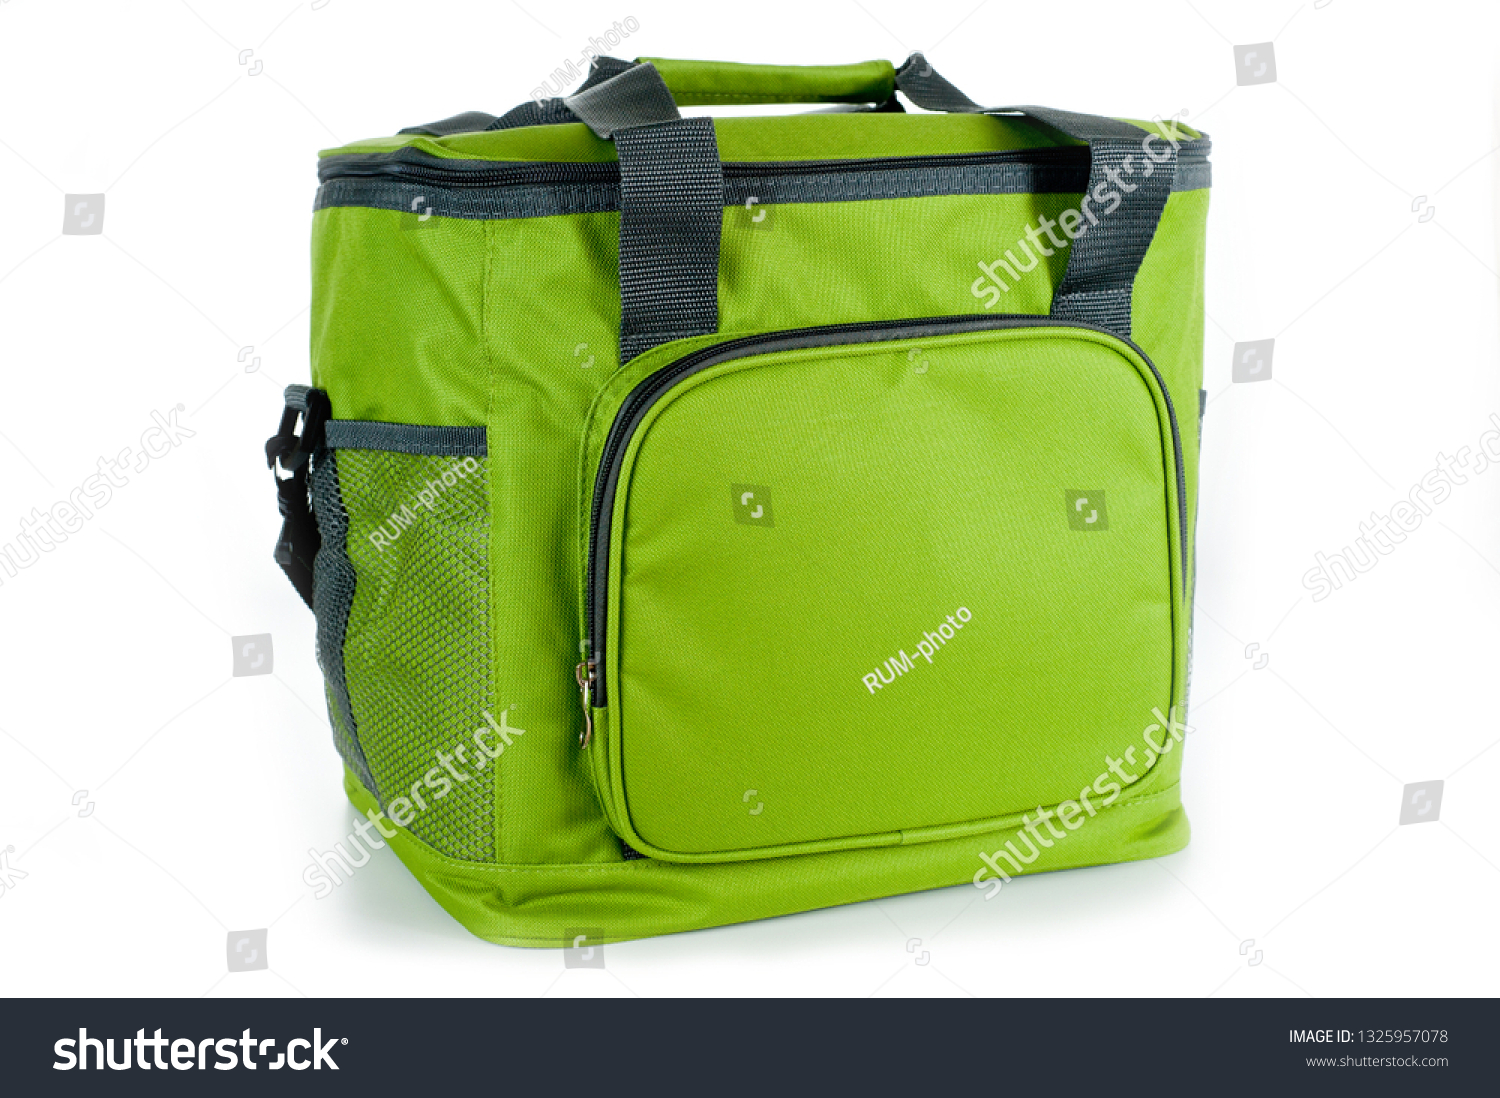 Bag cooler bright green for carrying and storing products. #1325957078